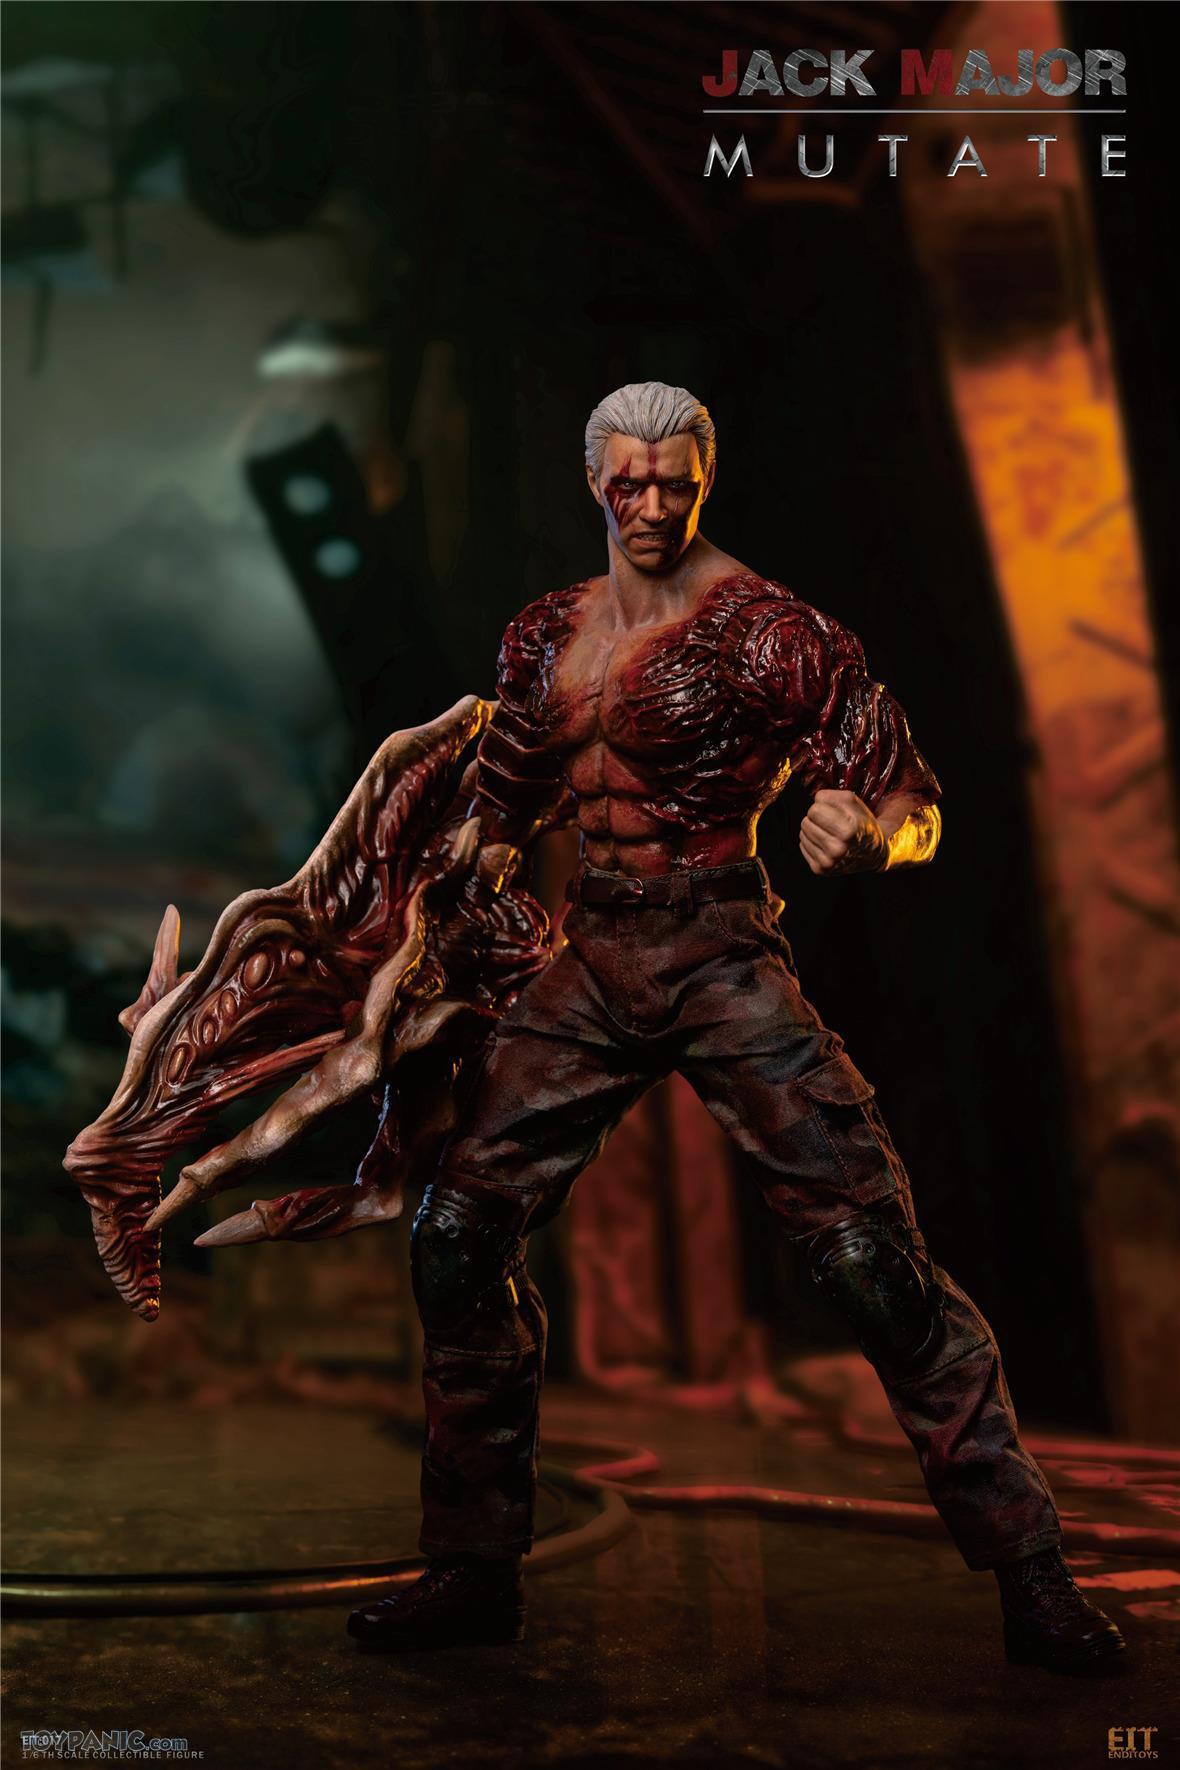 mutate - NEW PRODUCT:  1/6 Jack Major Mutate from End I Toys  2732024105950AM_6739850